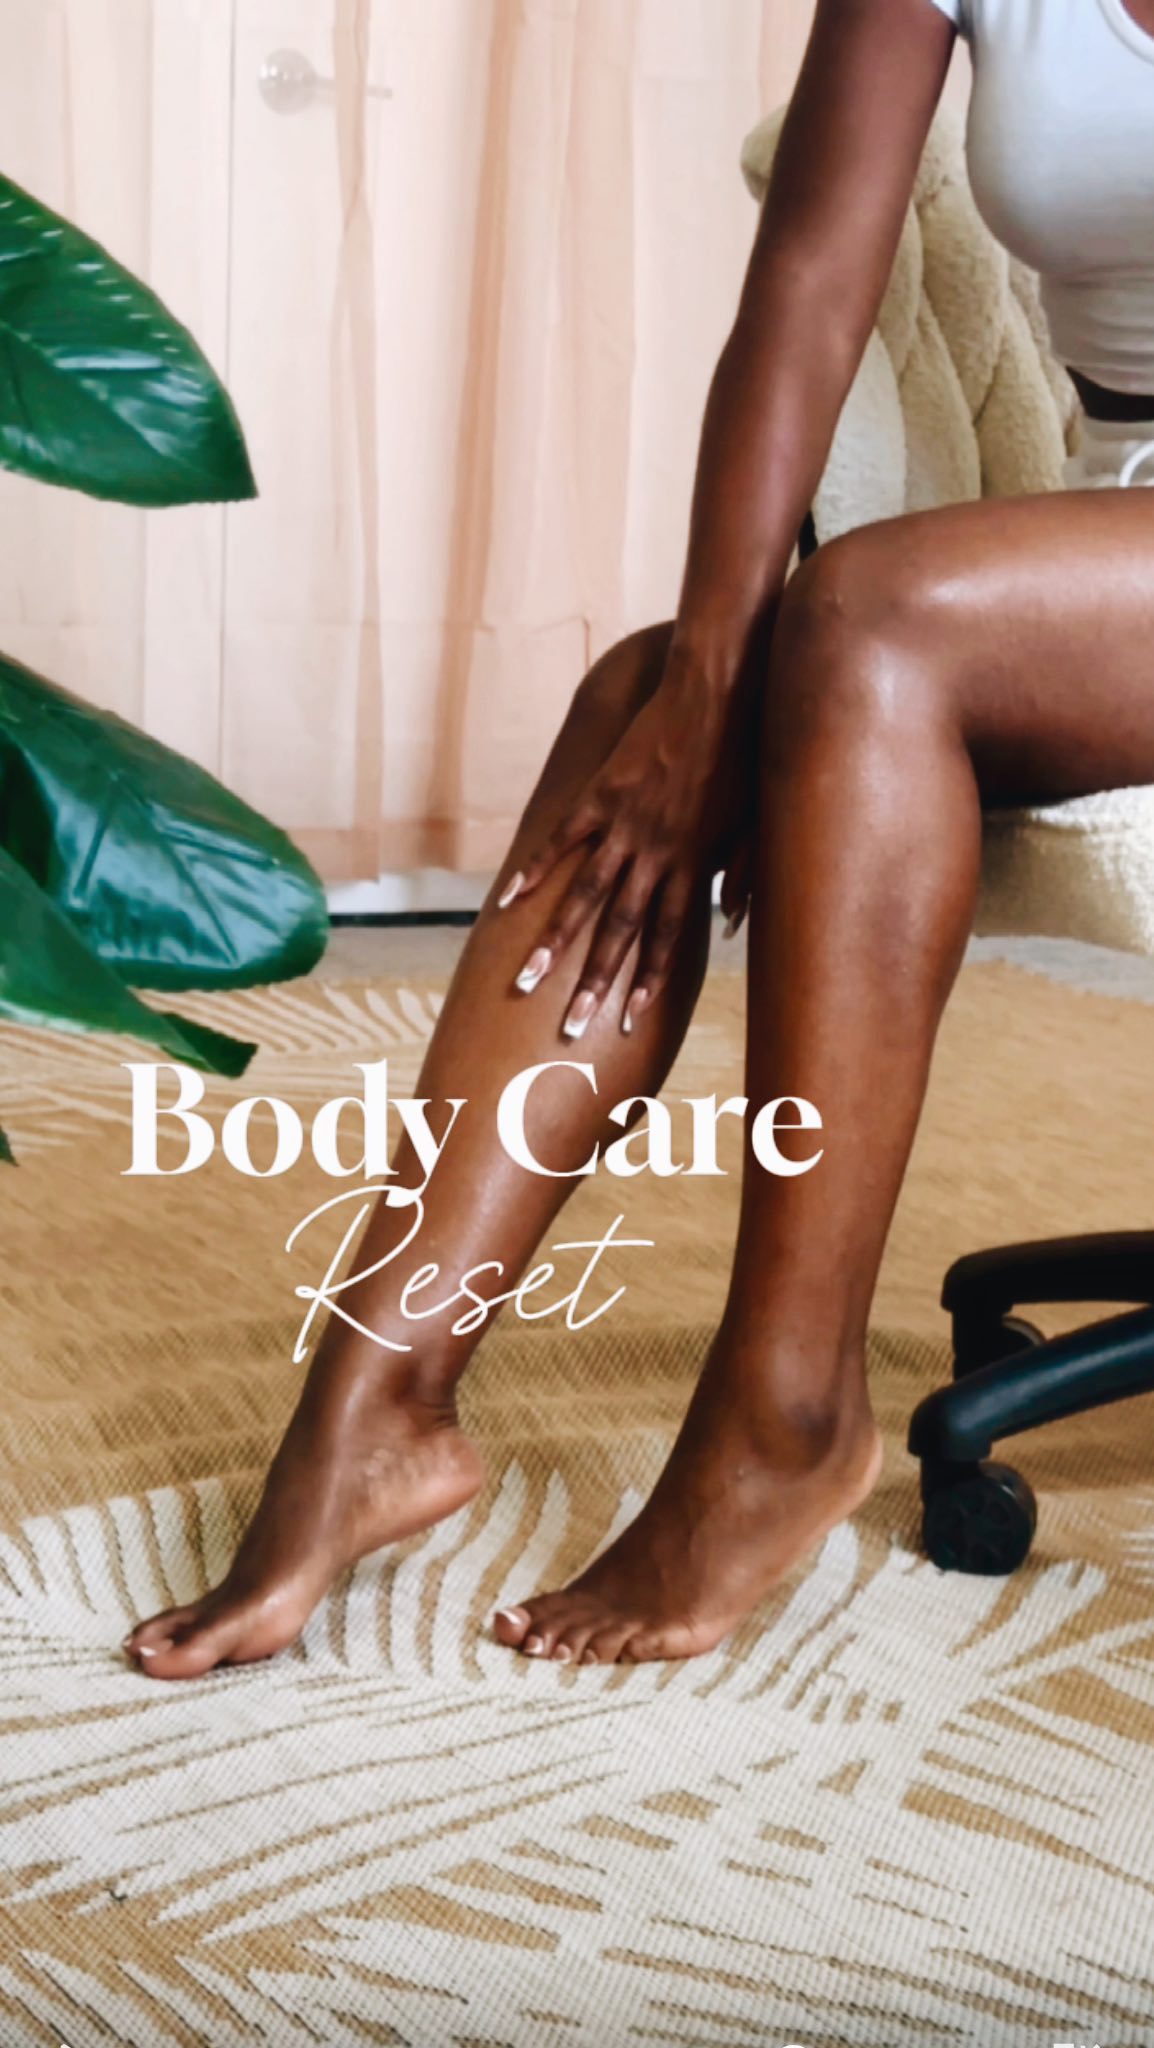 Body Care Reset🚿✨Details👇🏾

1. you can comment “need” to get links automatically DM’ed to you 

Or 

2. visit the link i